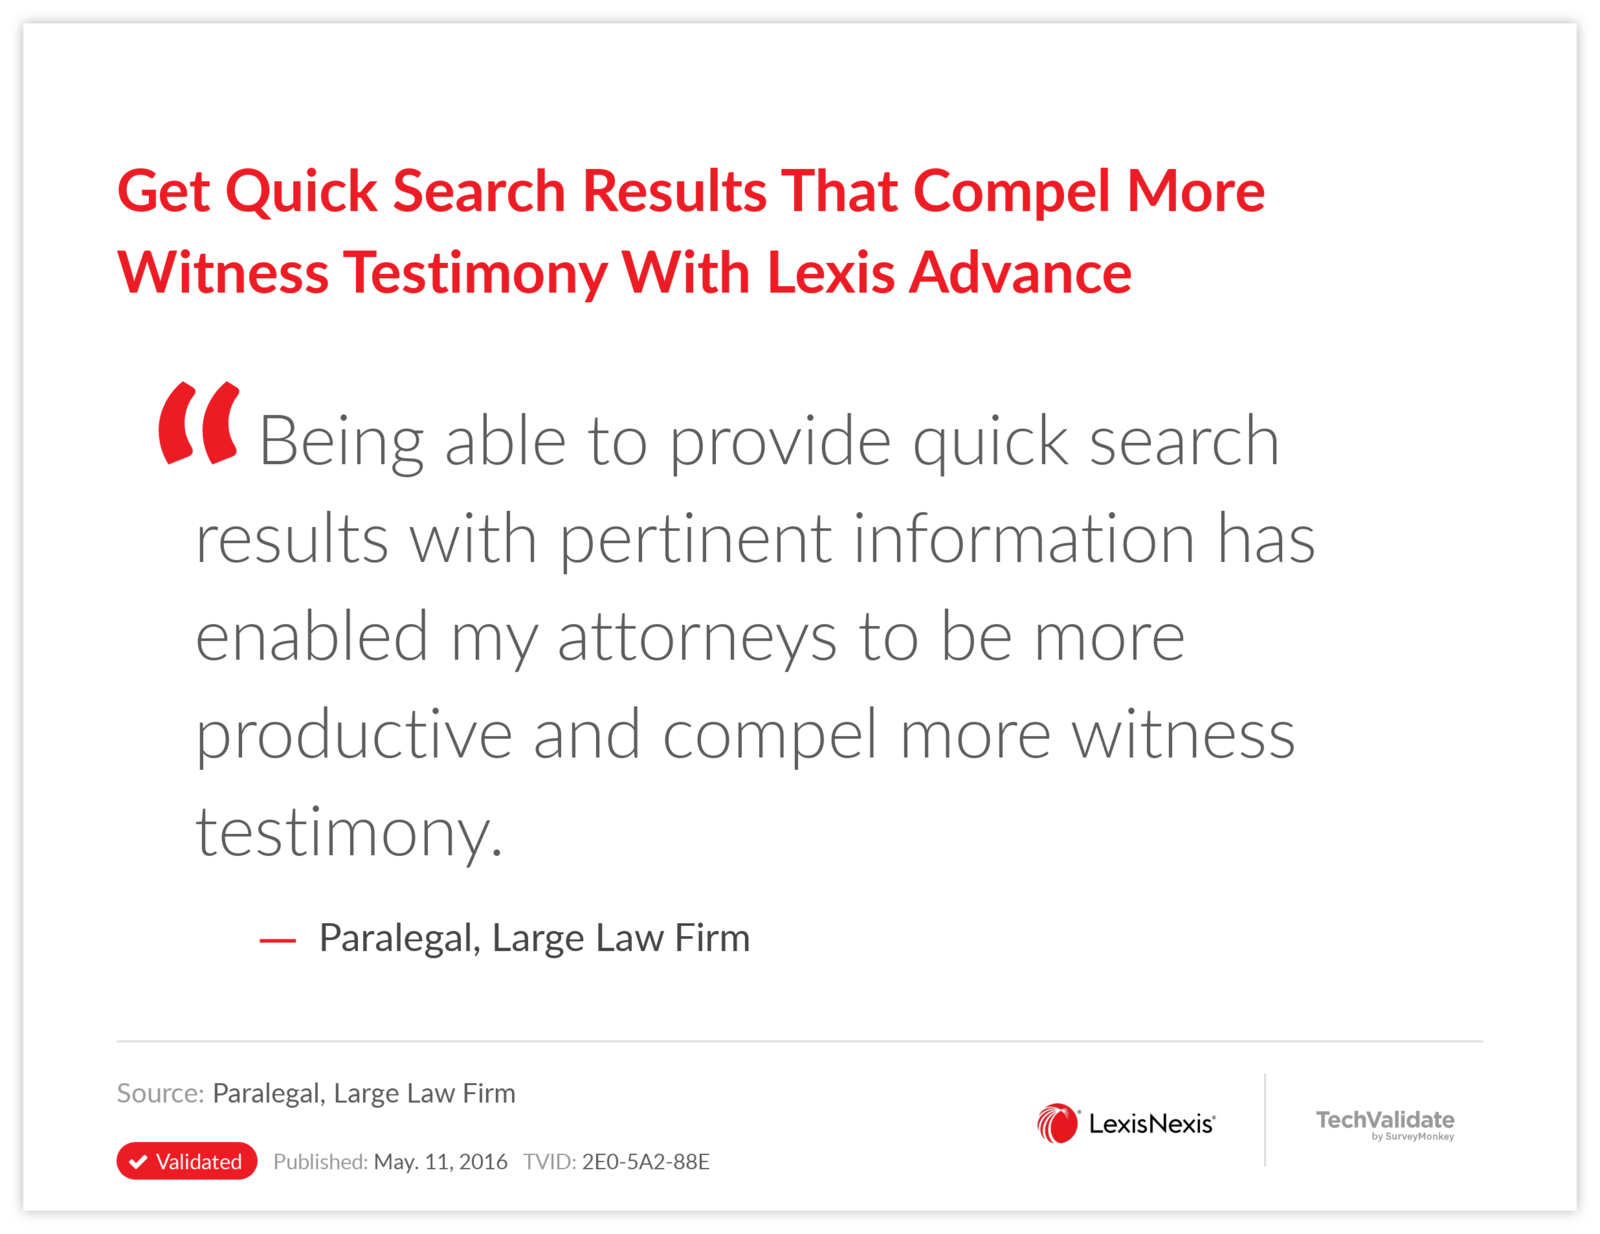 Get Quick Search Results That Compel More Witness Testimony With Lexis Advance